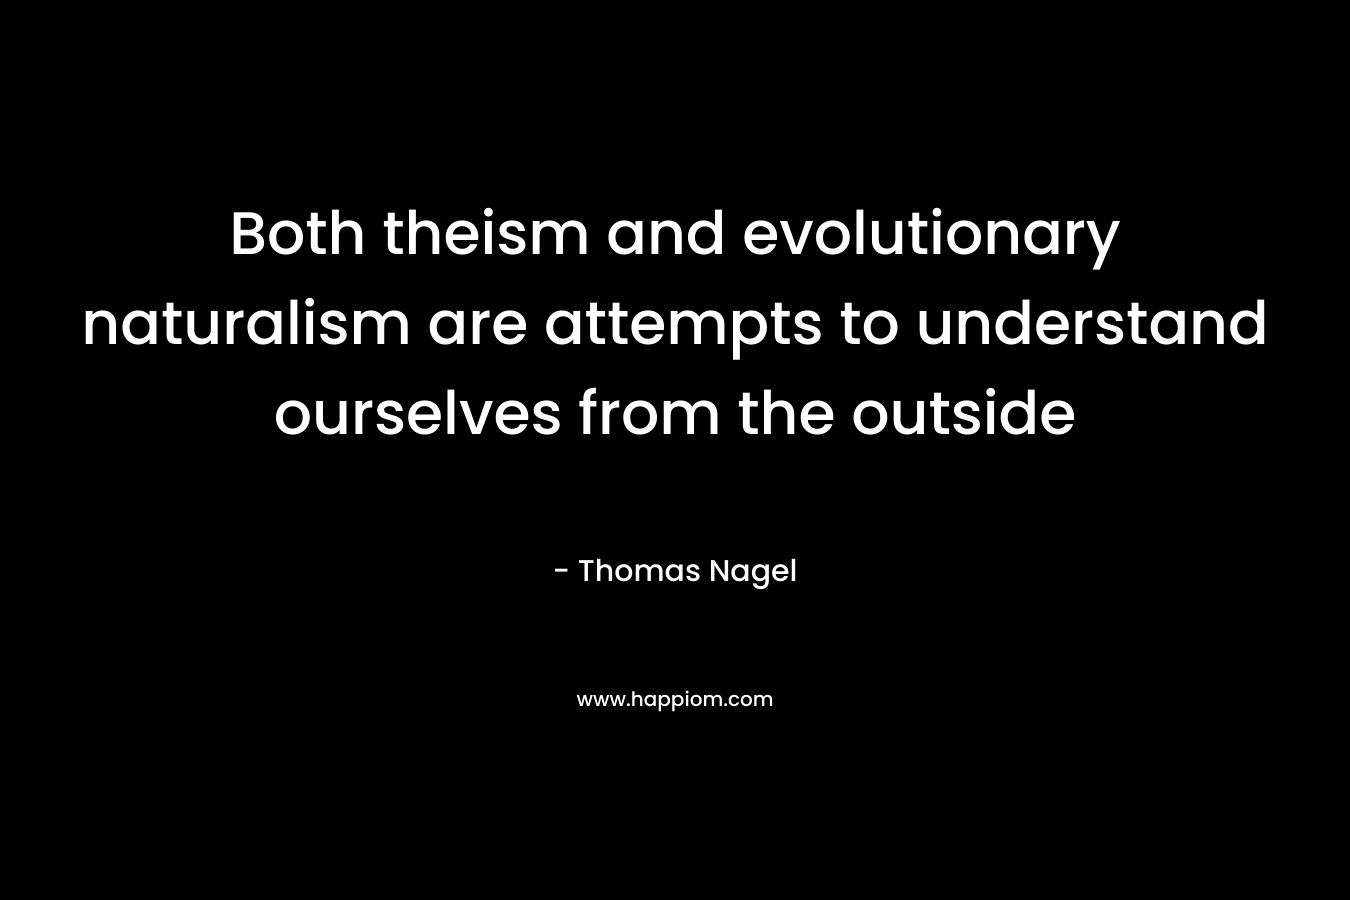 Both theism and evolutionary naturalism are attempts to understand ourselves from the outside – Thomas Nagel